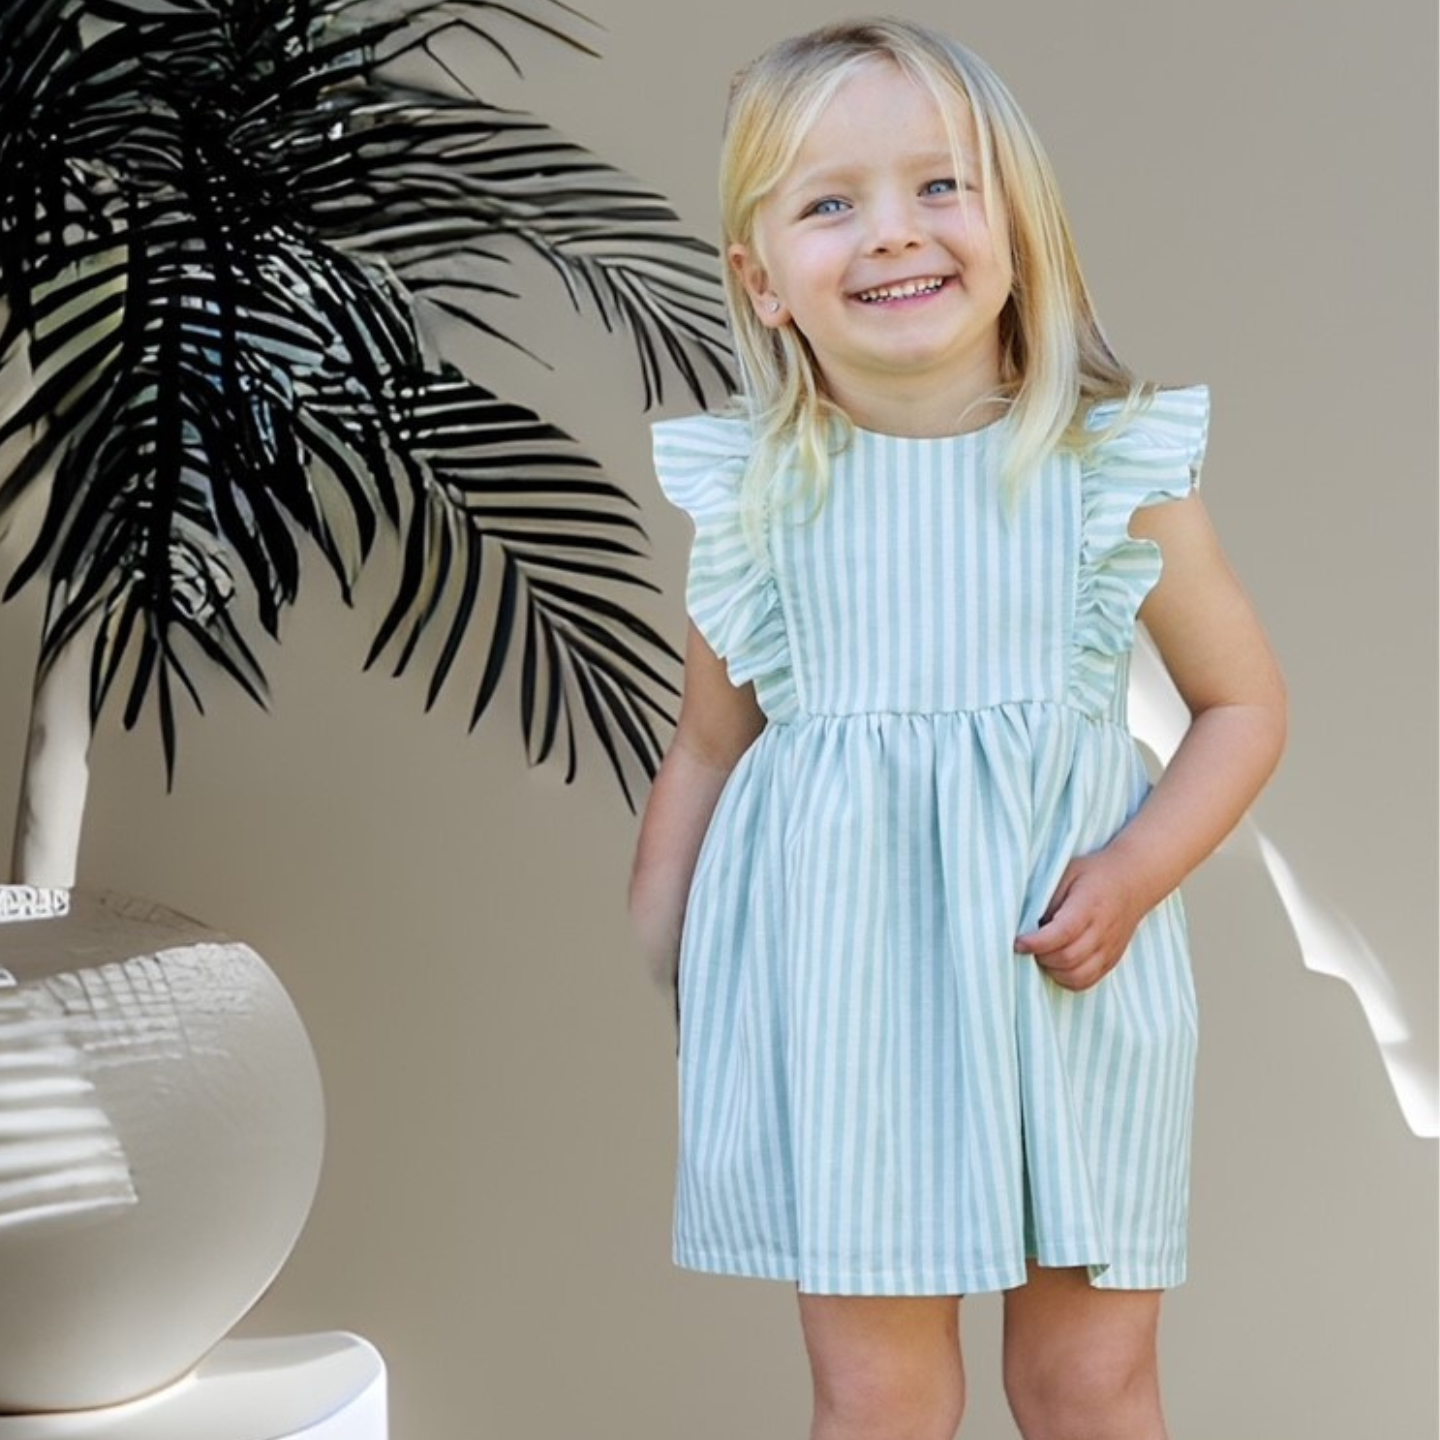 Shop All Girls – Bella Boo's Baby Boutique